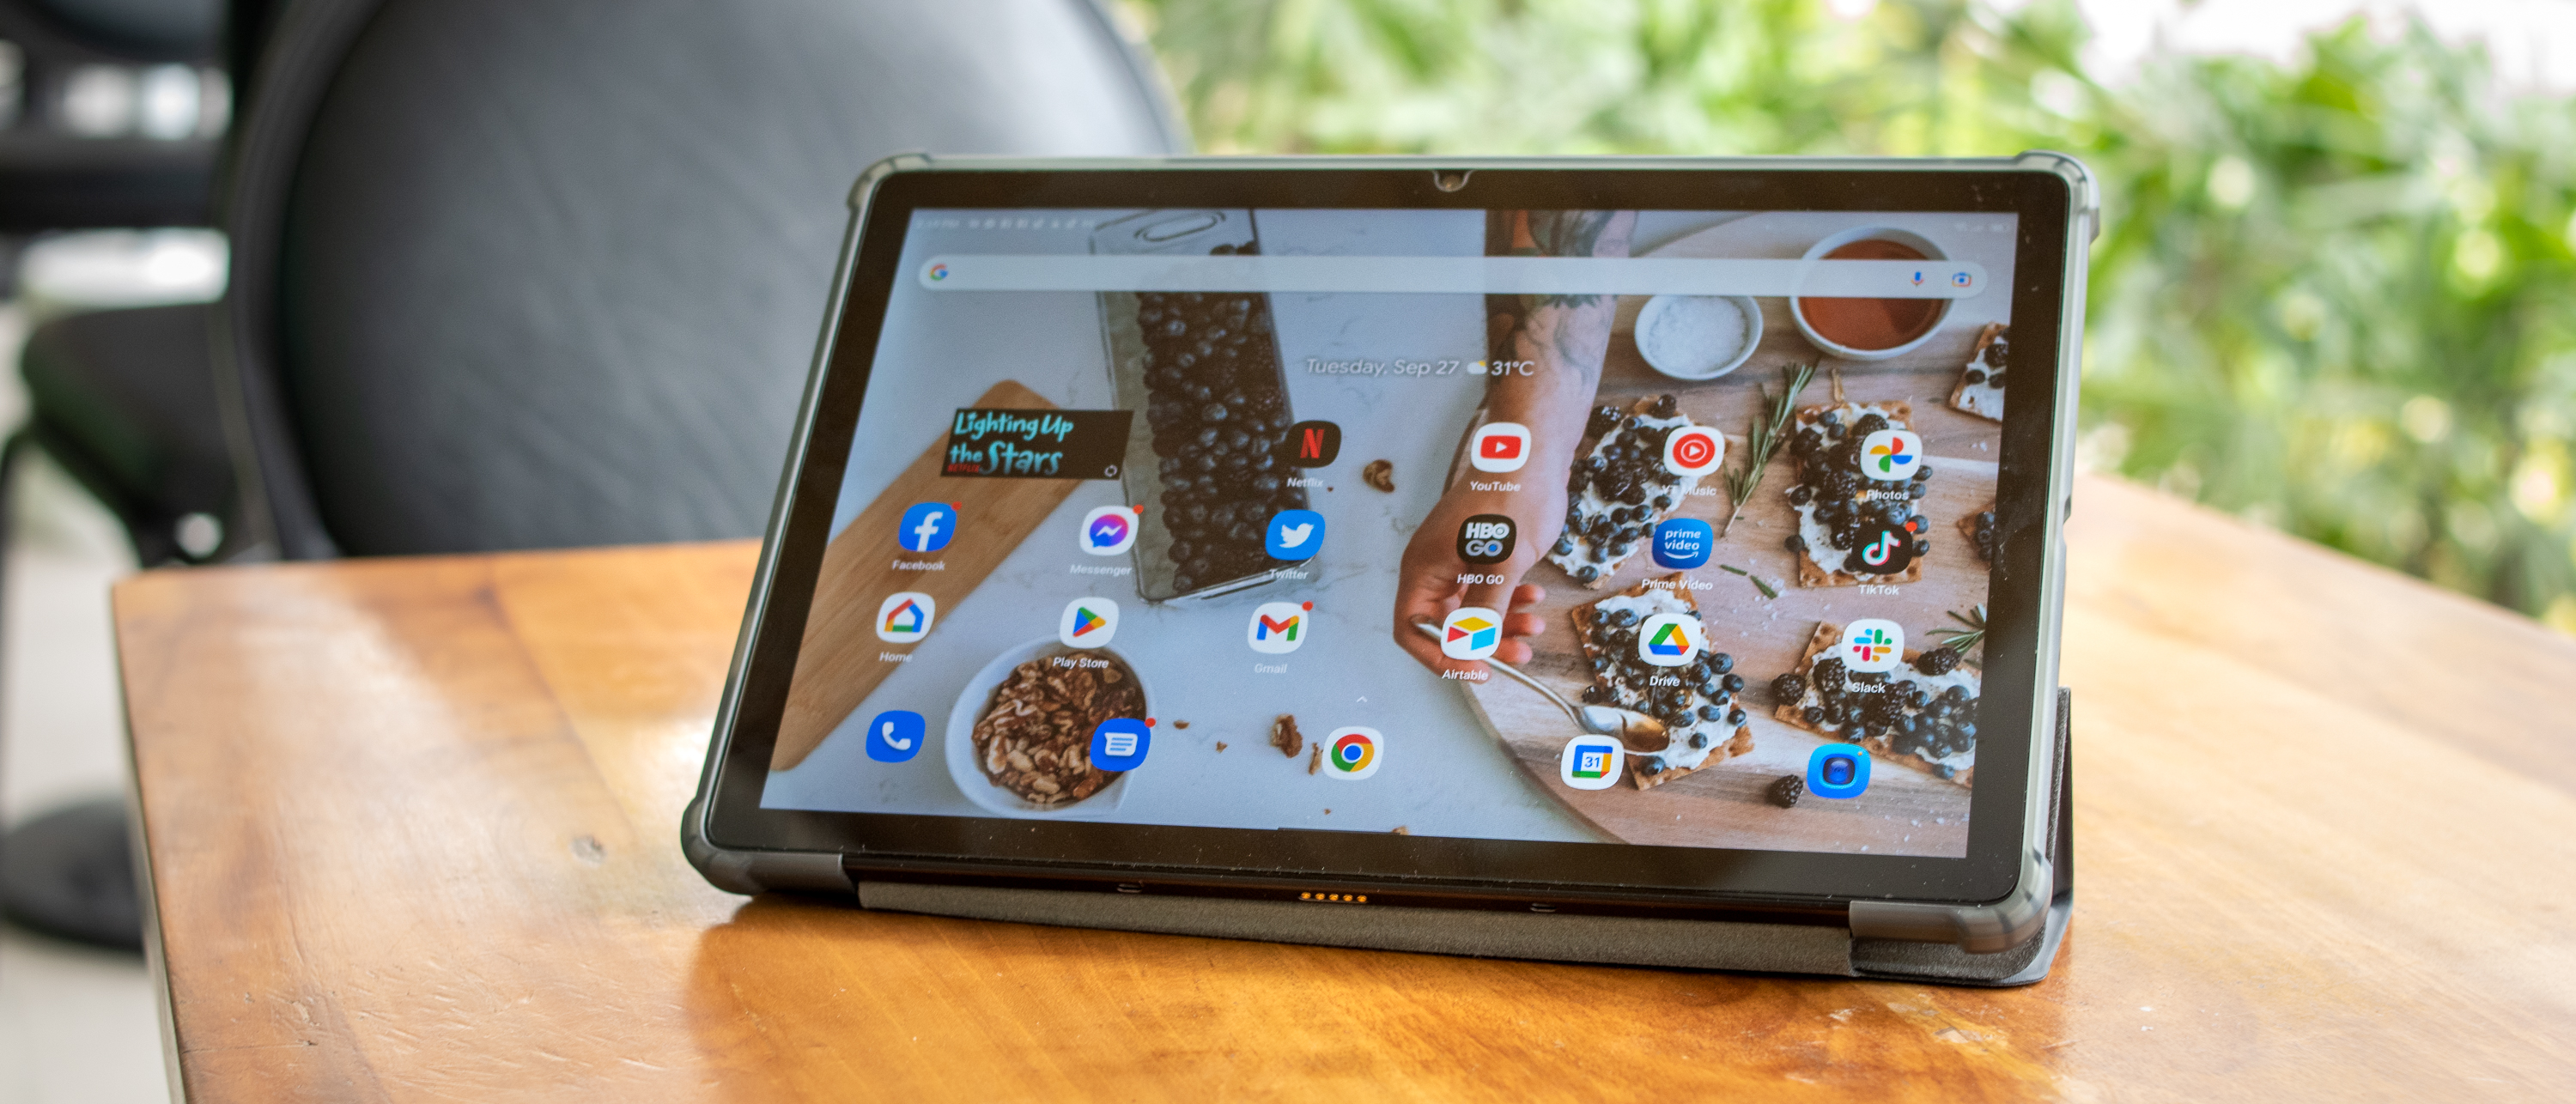 Blackview Oscal Pad 13 Tablet Review